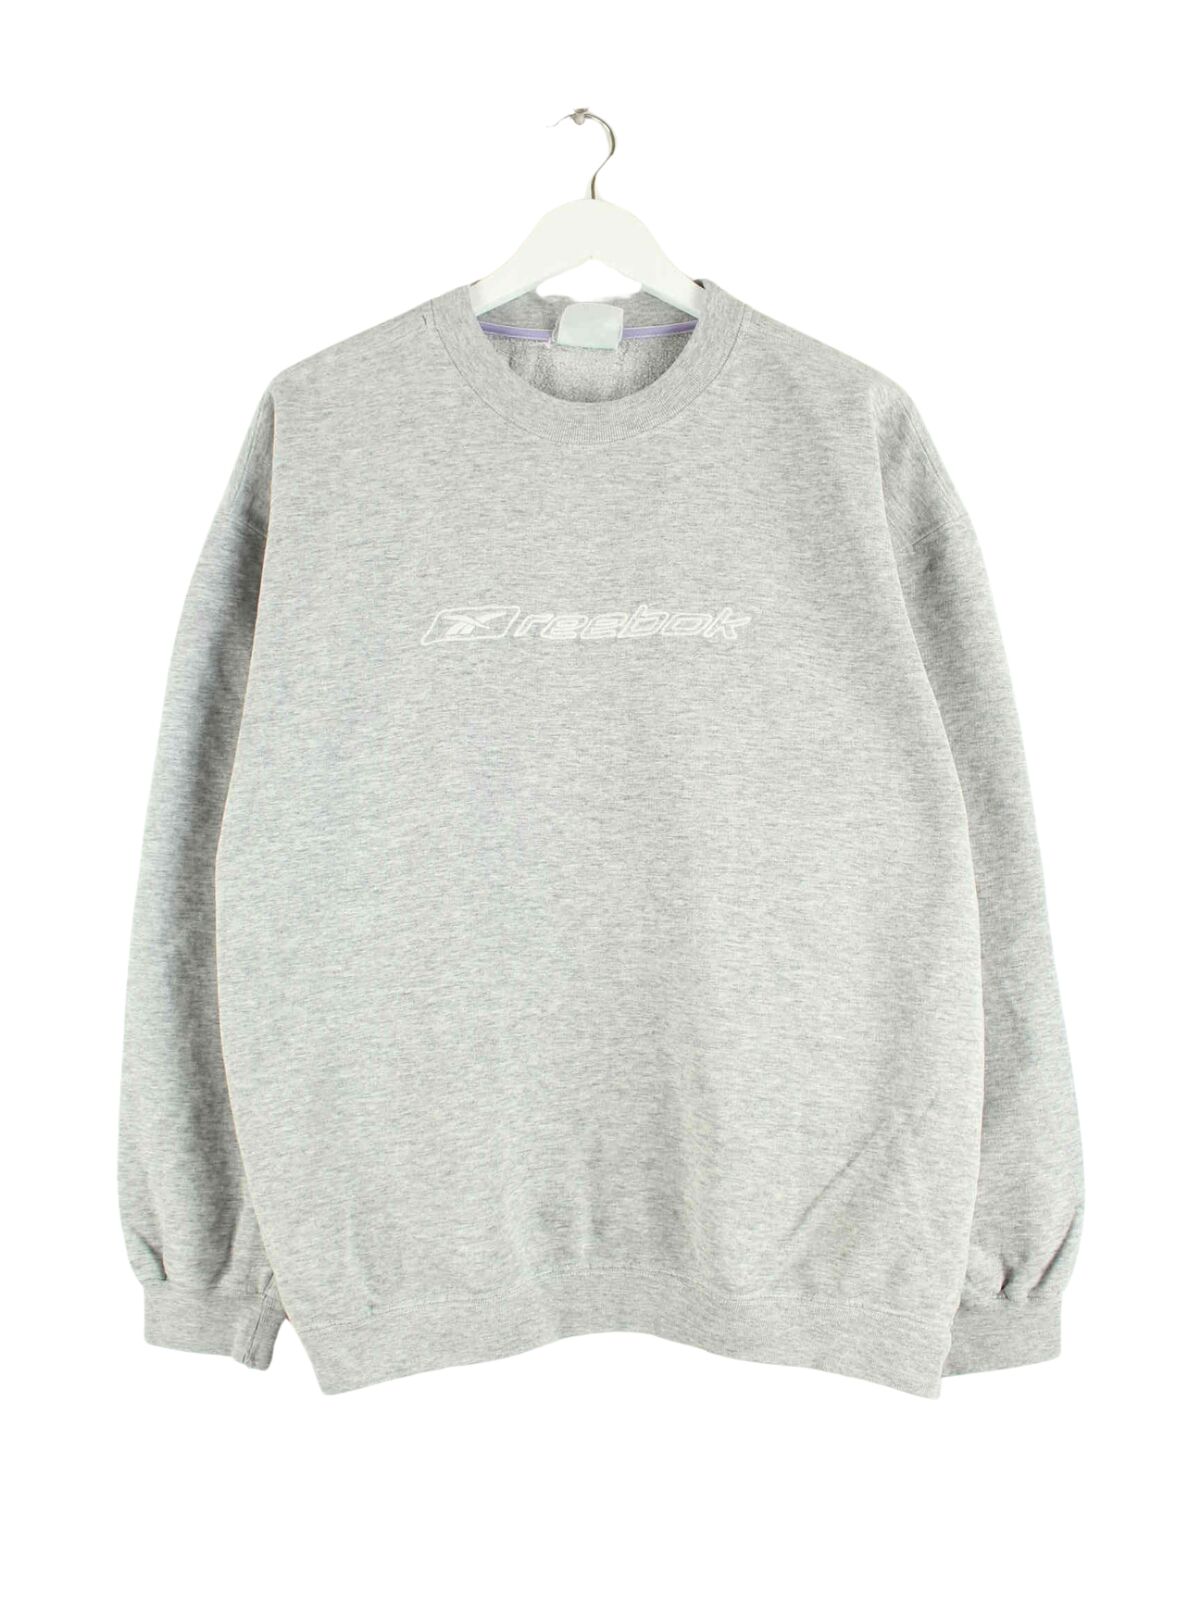 Reebok y2k Embroidered Sweater Grau L (front image)